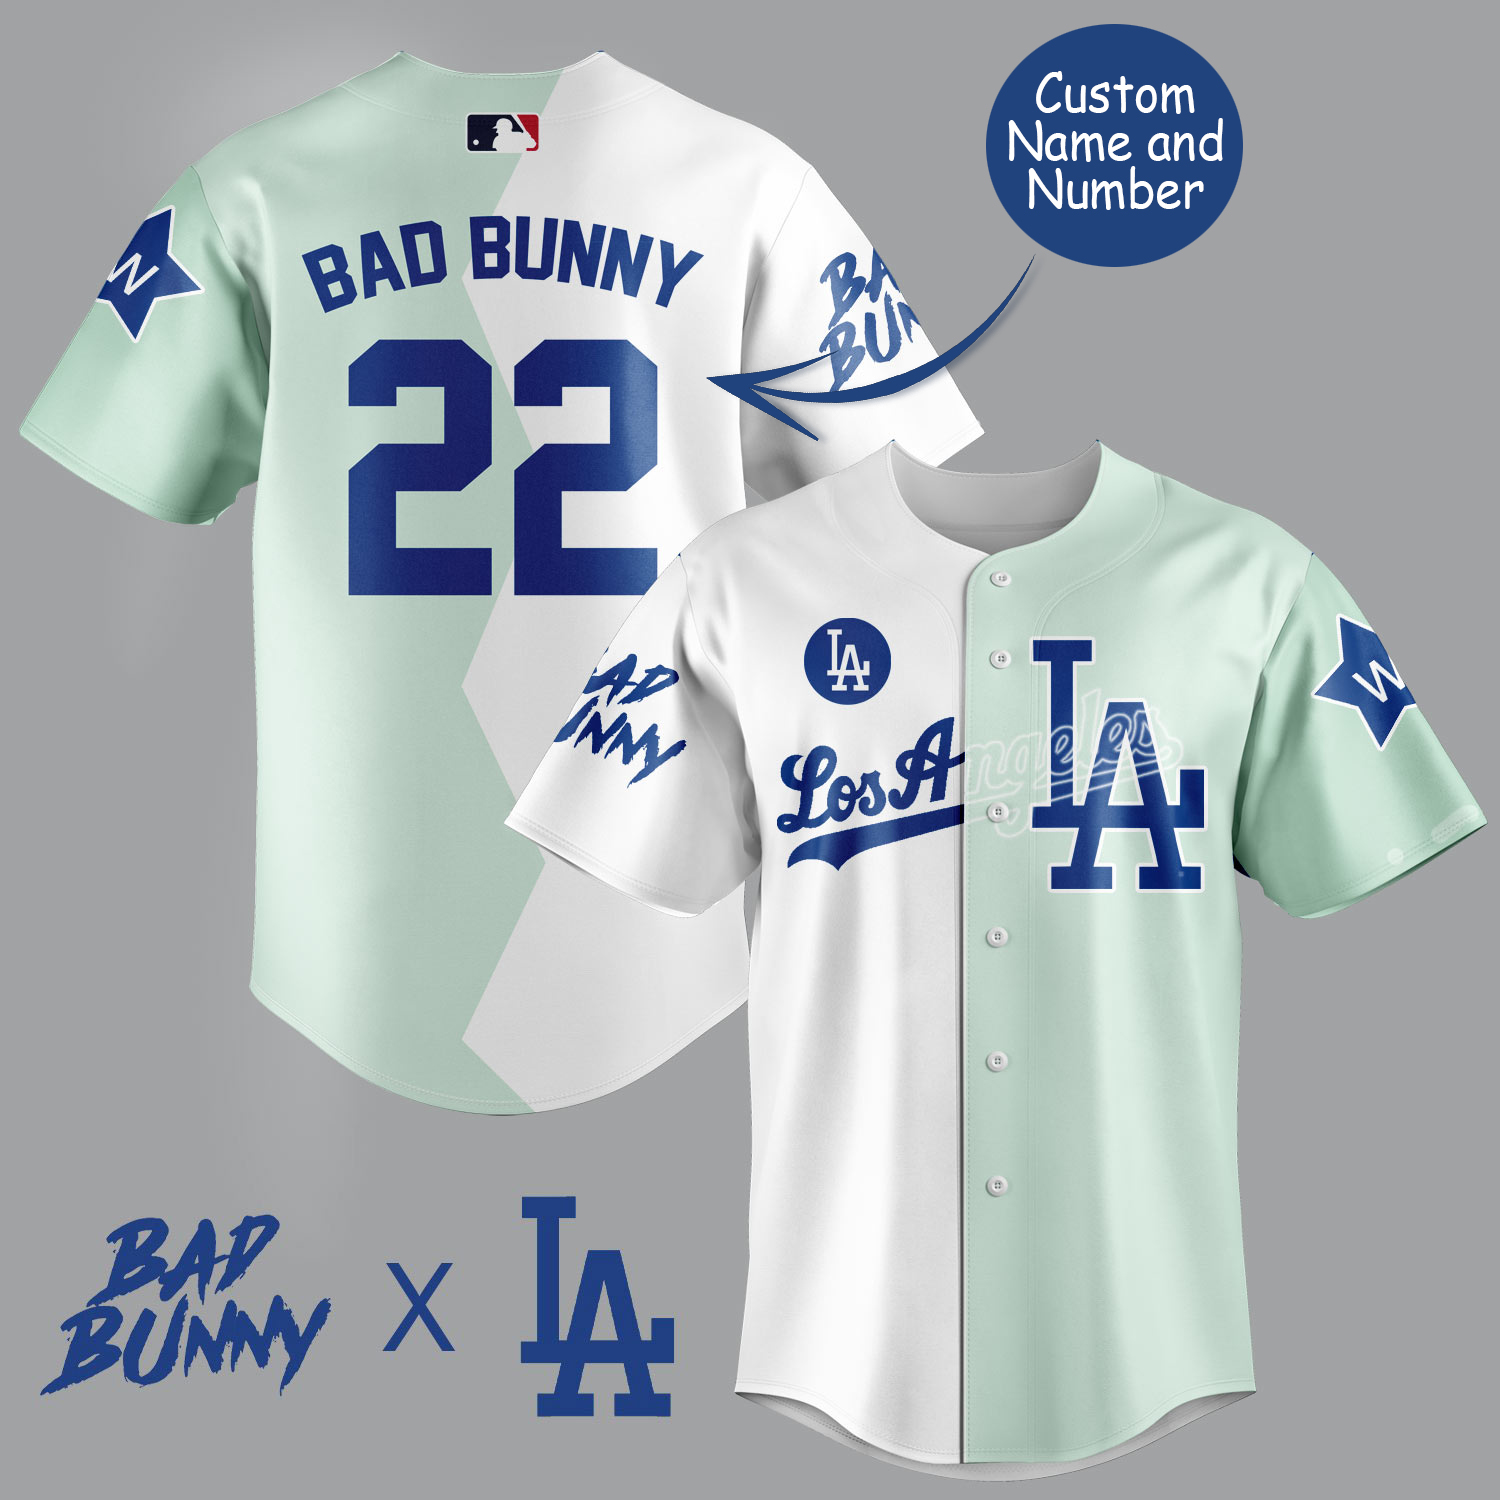 Bad Bunny Jersey With Option to Personalize – The Happy AZ Shop